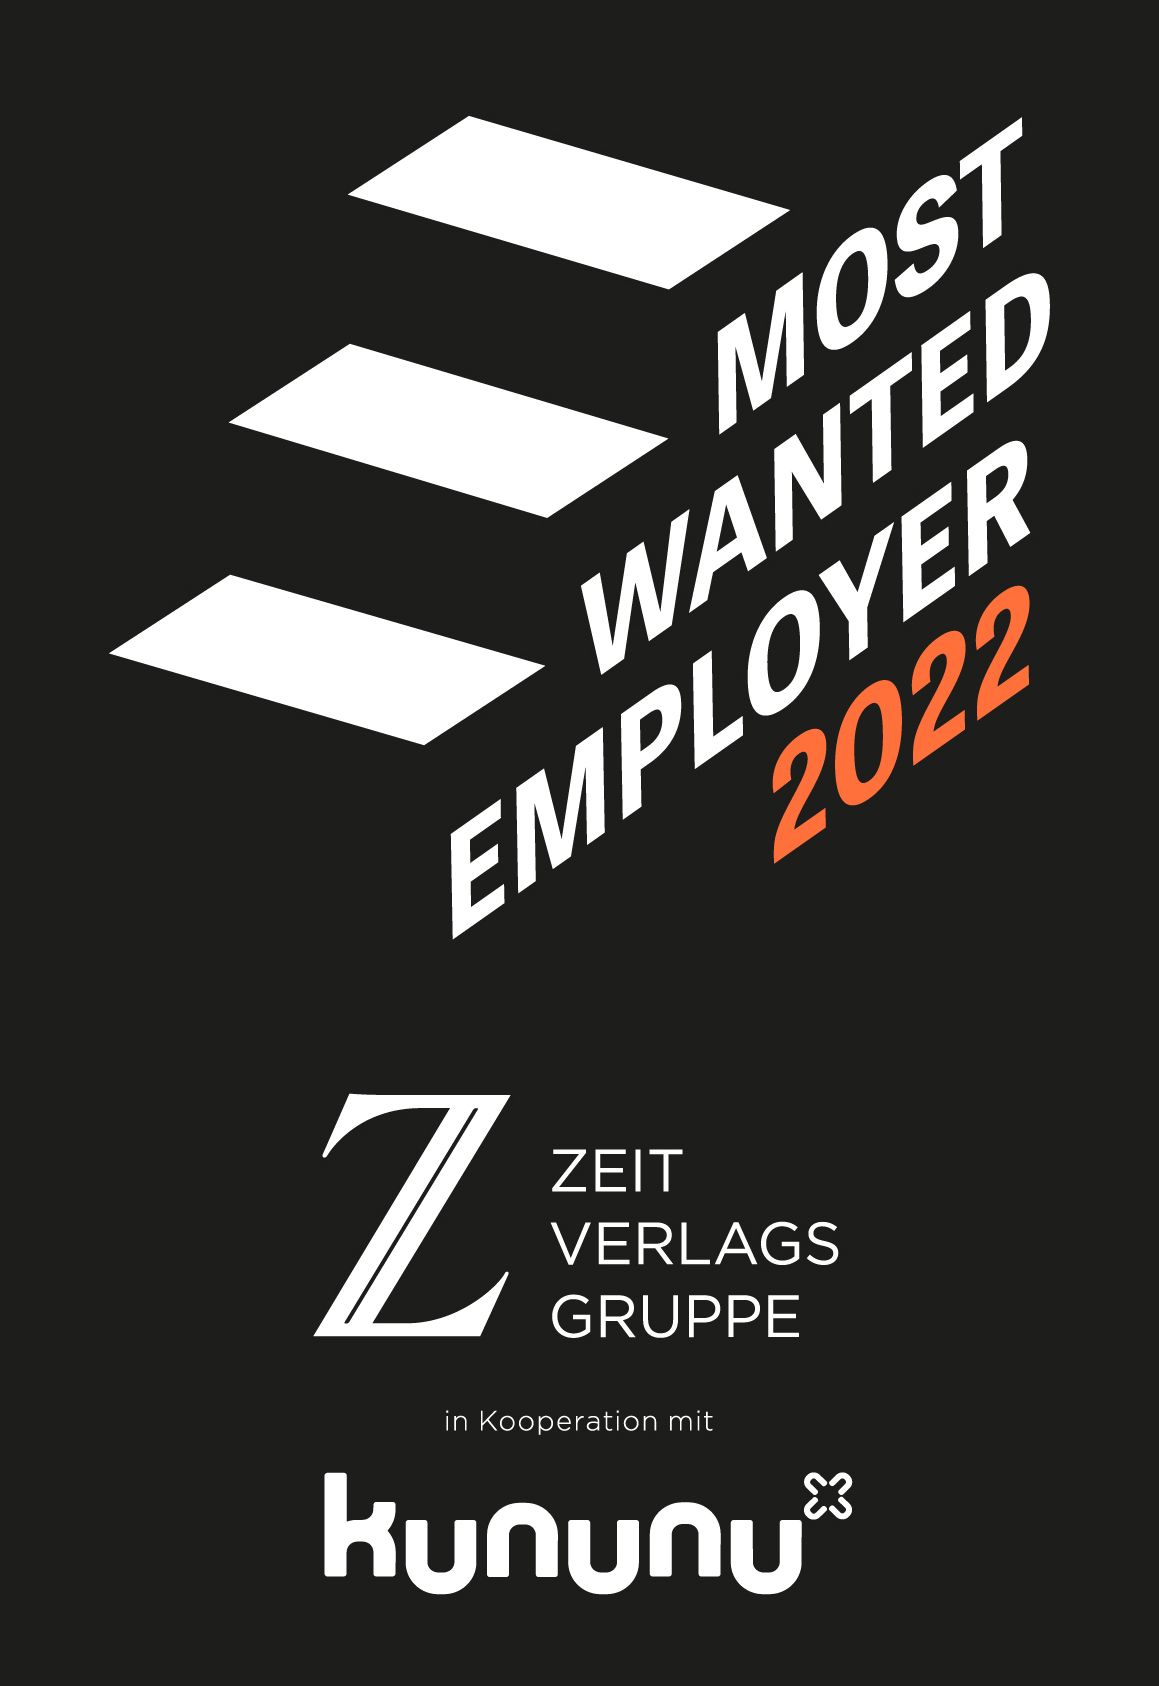 Most Wanted Employer